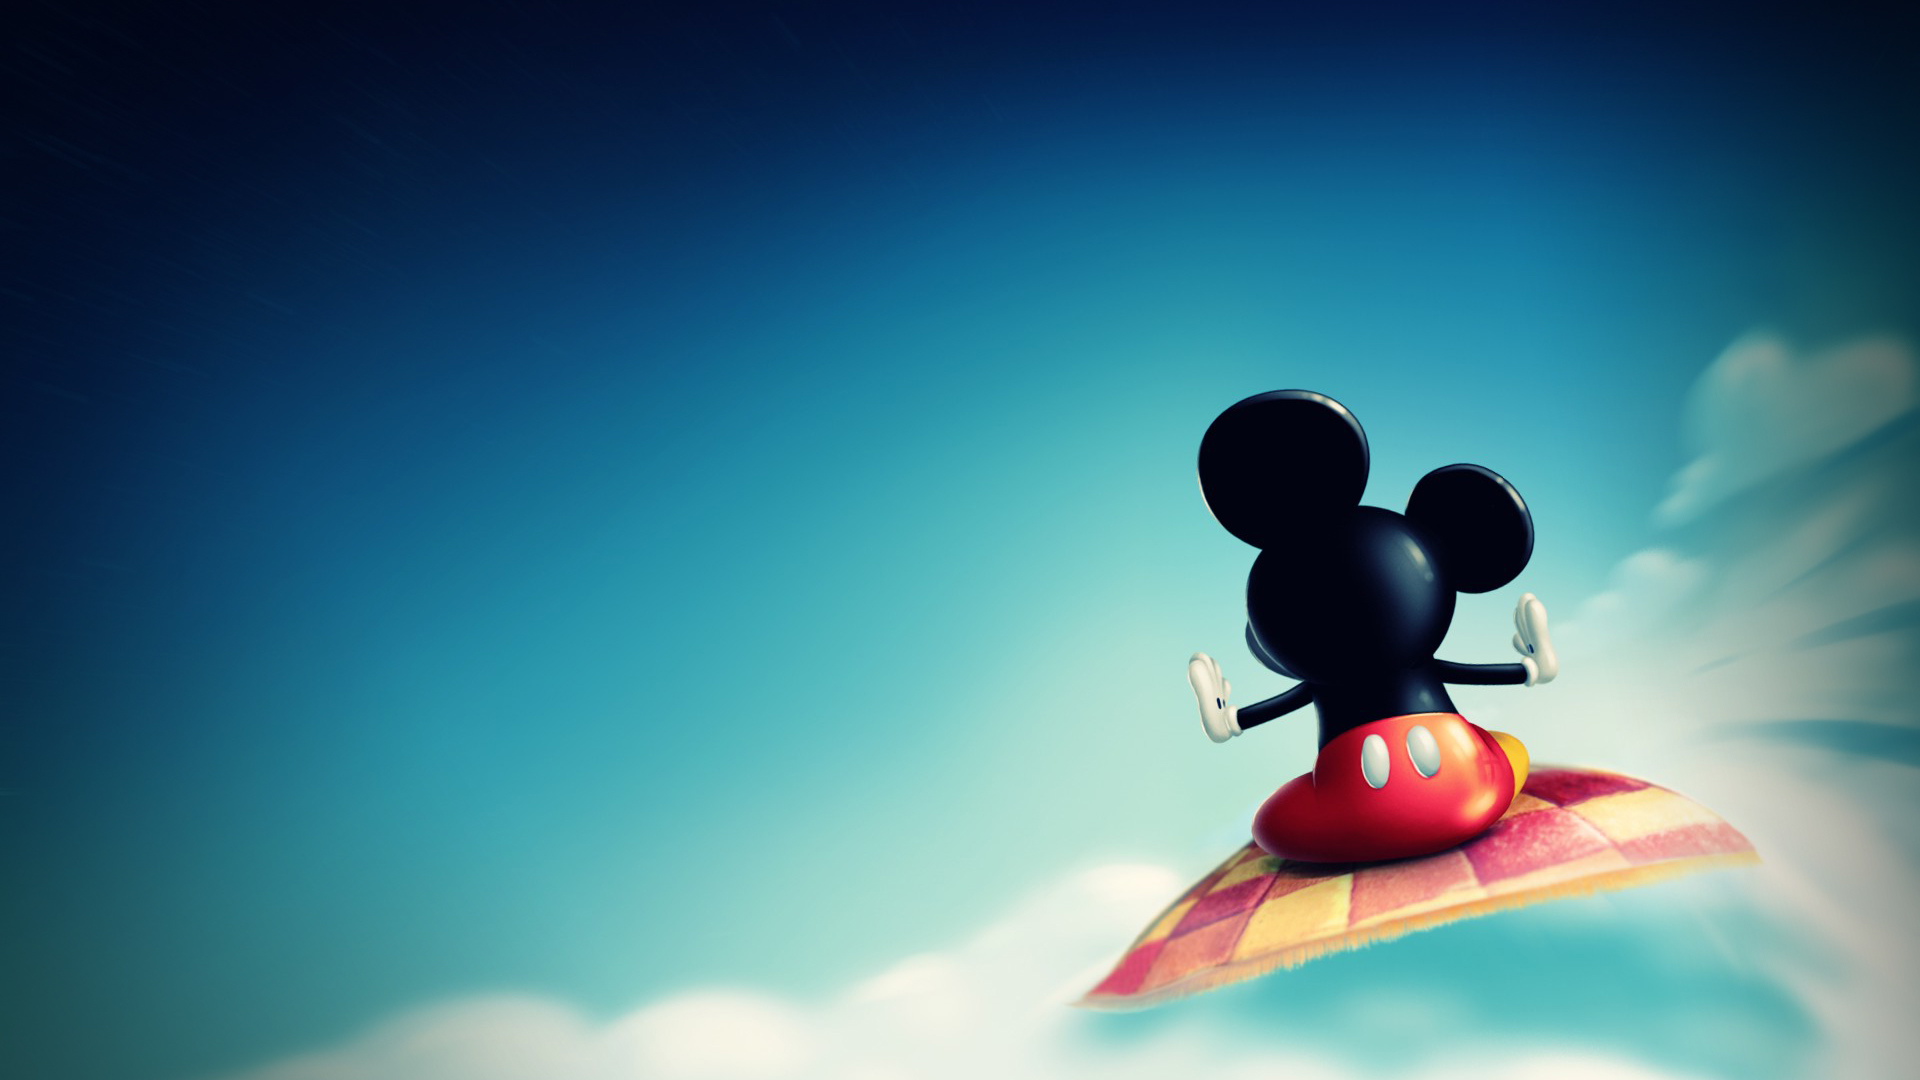 1080x1920  1080x1920 mickey mouse hd artwork evil for Iphone 6 7 8  wallpaper  Coolwallpapersme